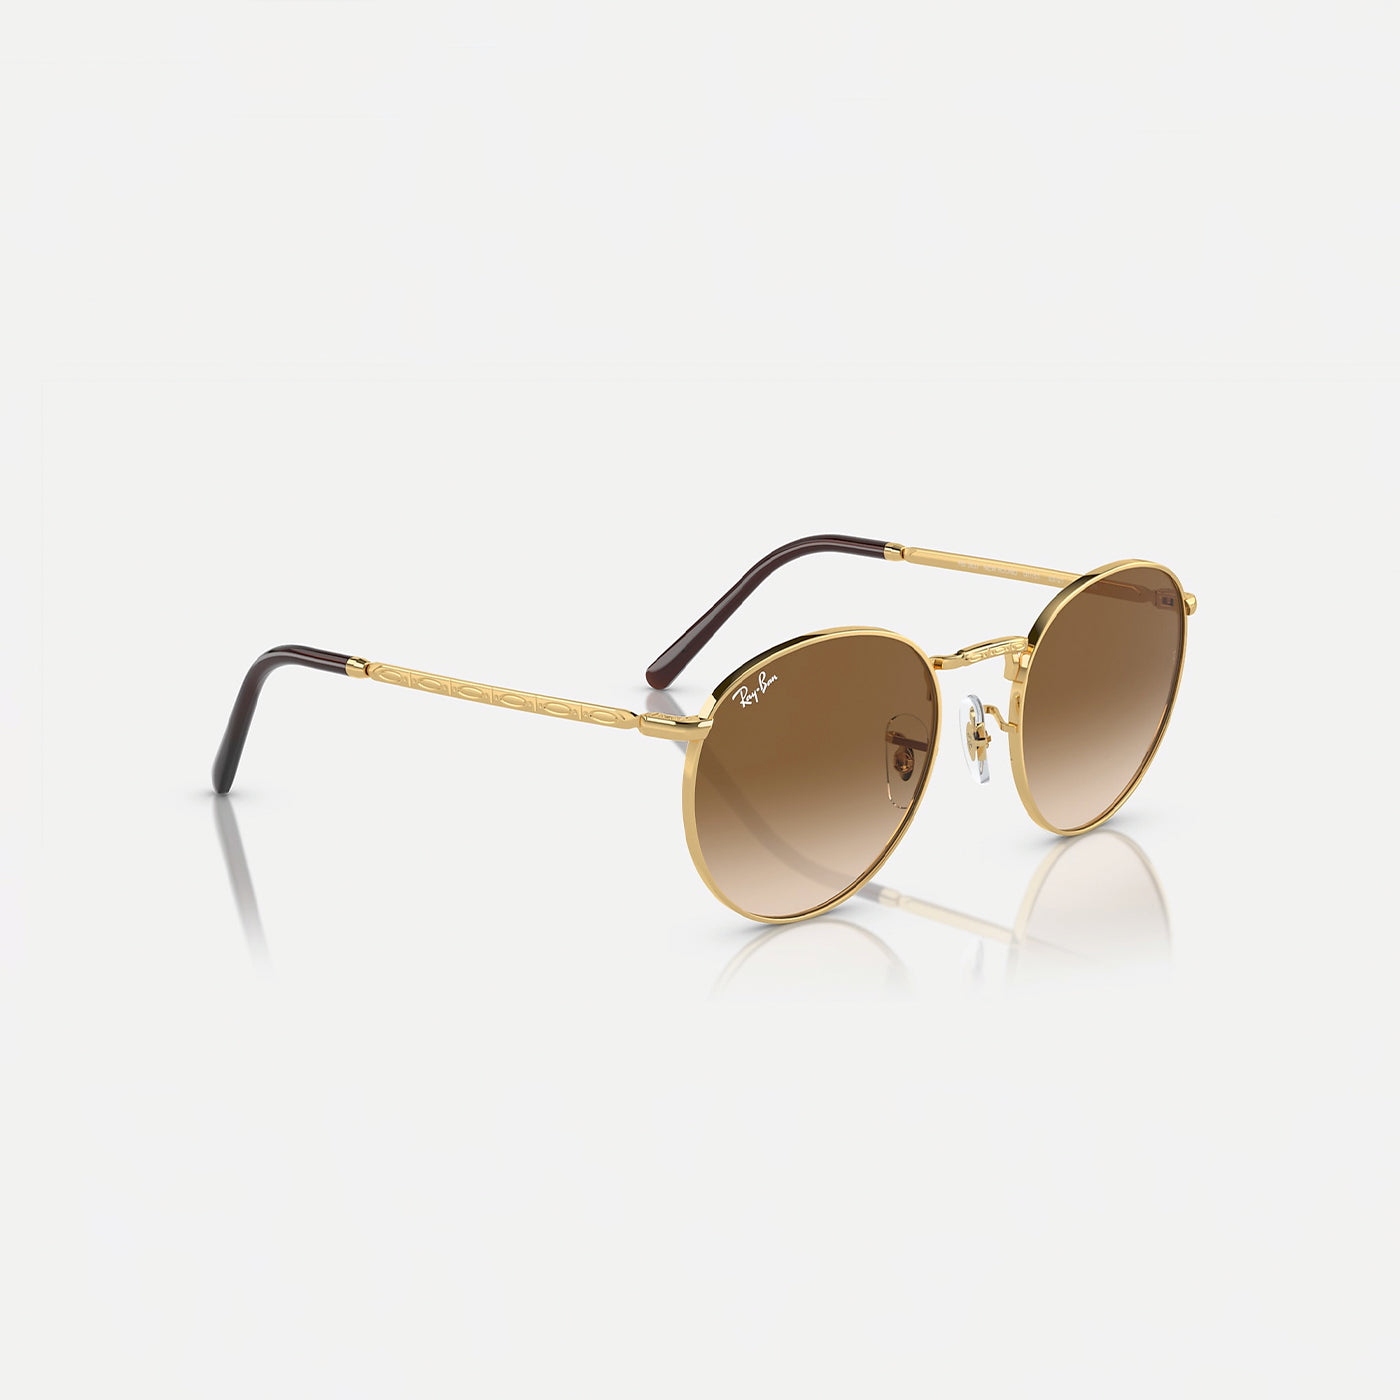 Ray-Ban - New Round RB3637 - Arista Gold Frame / Brown Gradient Lens - 50